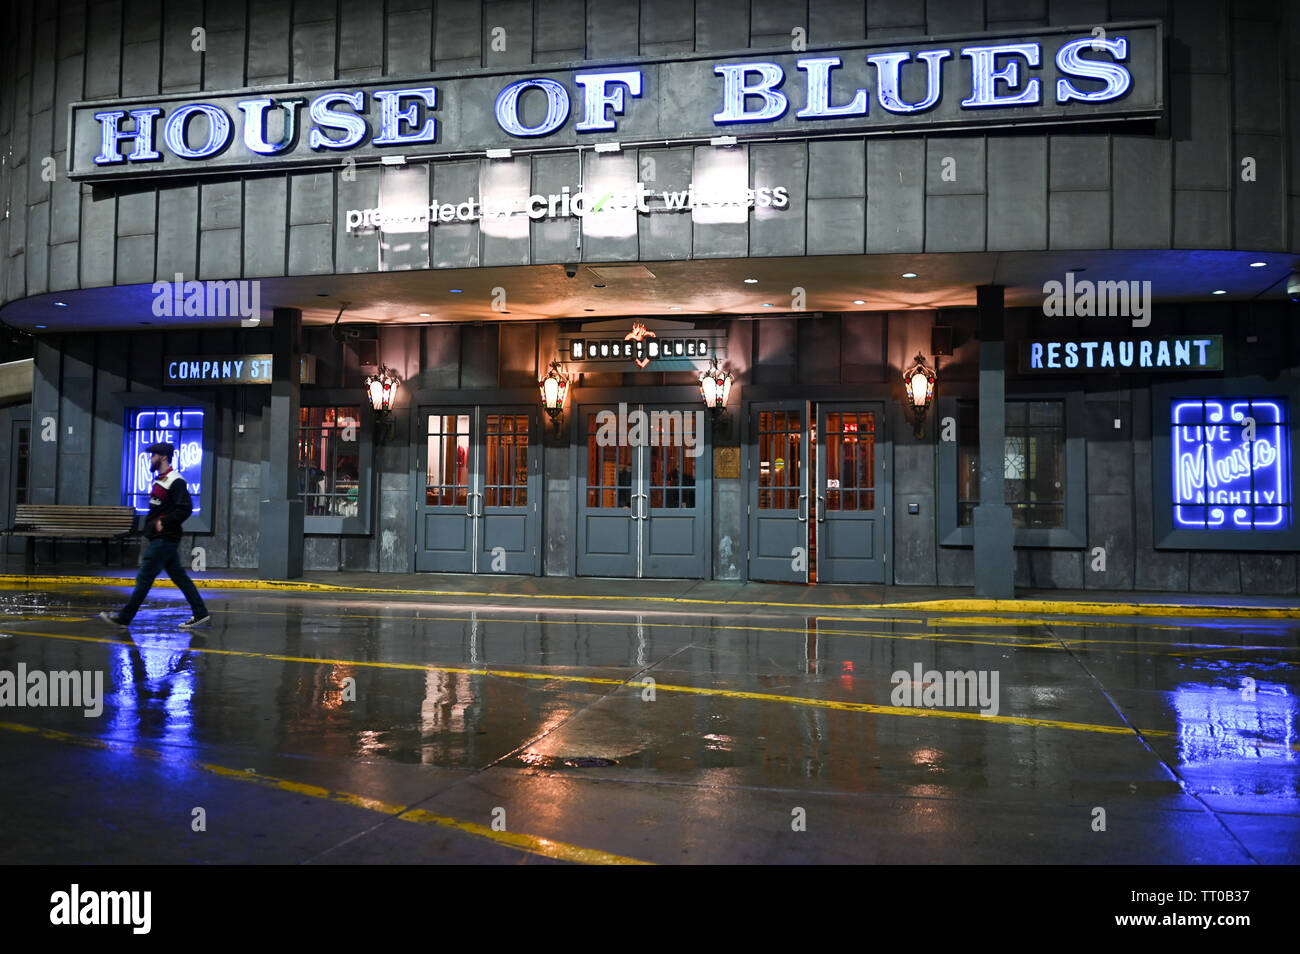 House of Blues by night in downtown Chicago. House of Blues is a chain of live music venues and restaurants in the US. Stock Photo